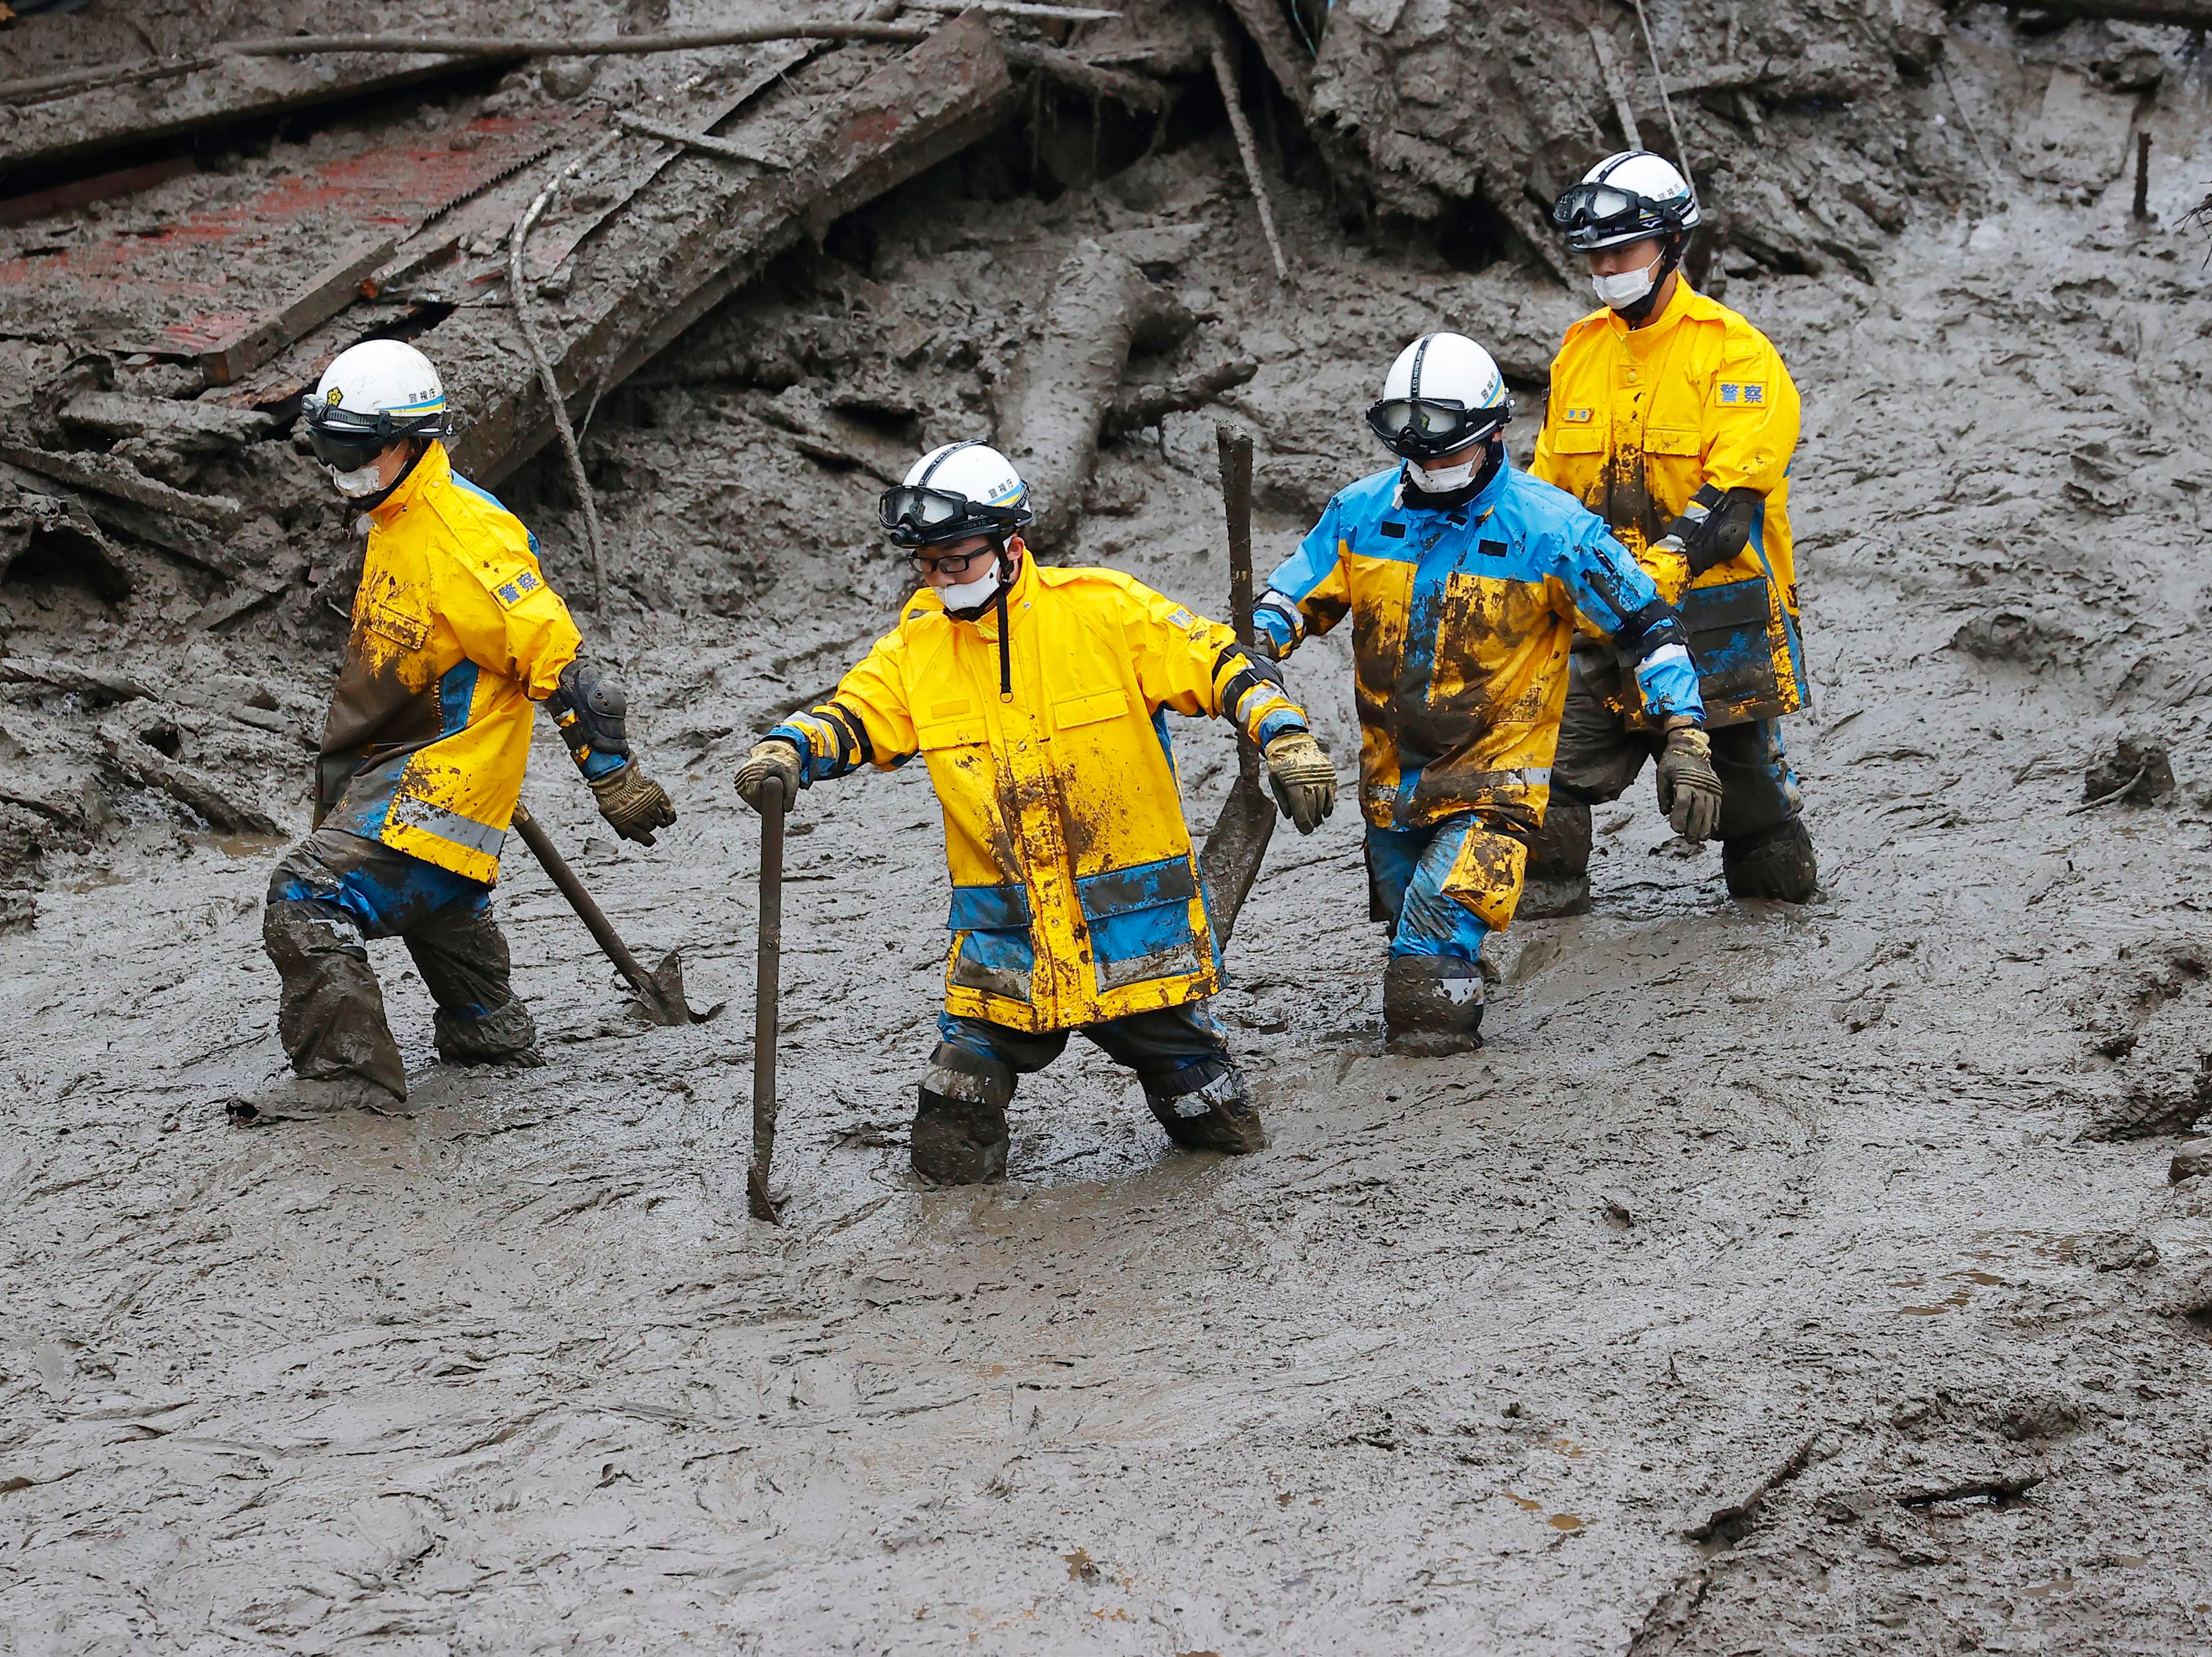 Rescuers wade through the mud in Atami, southwest of Tokyo